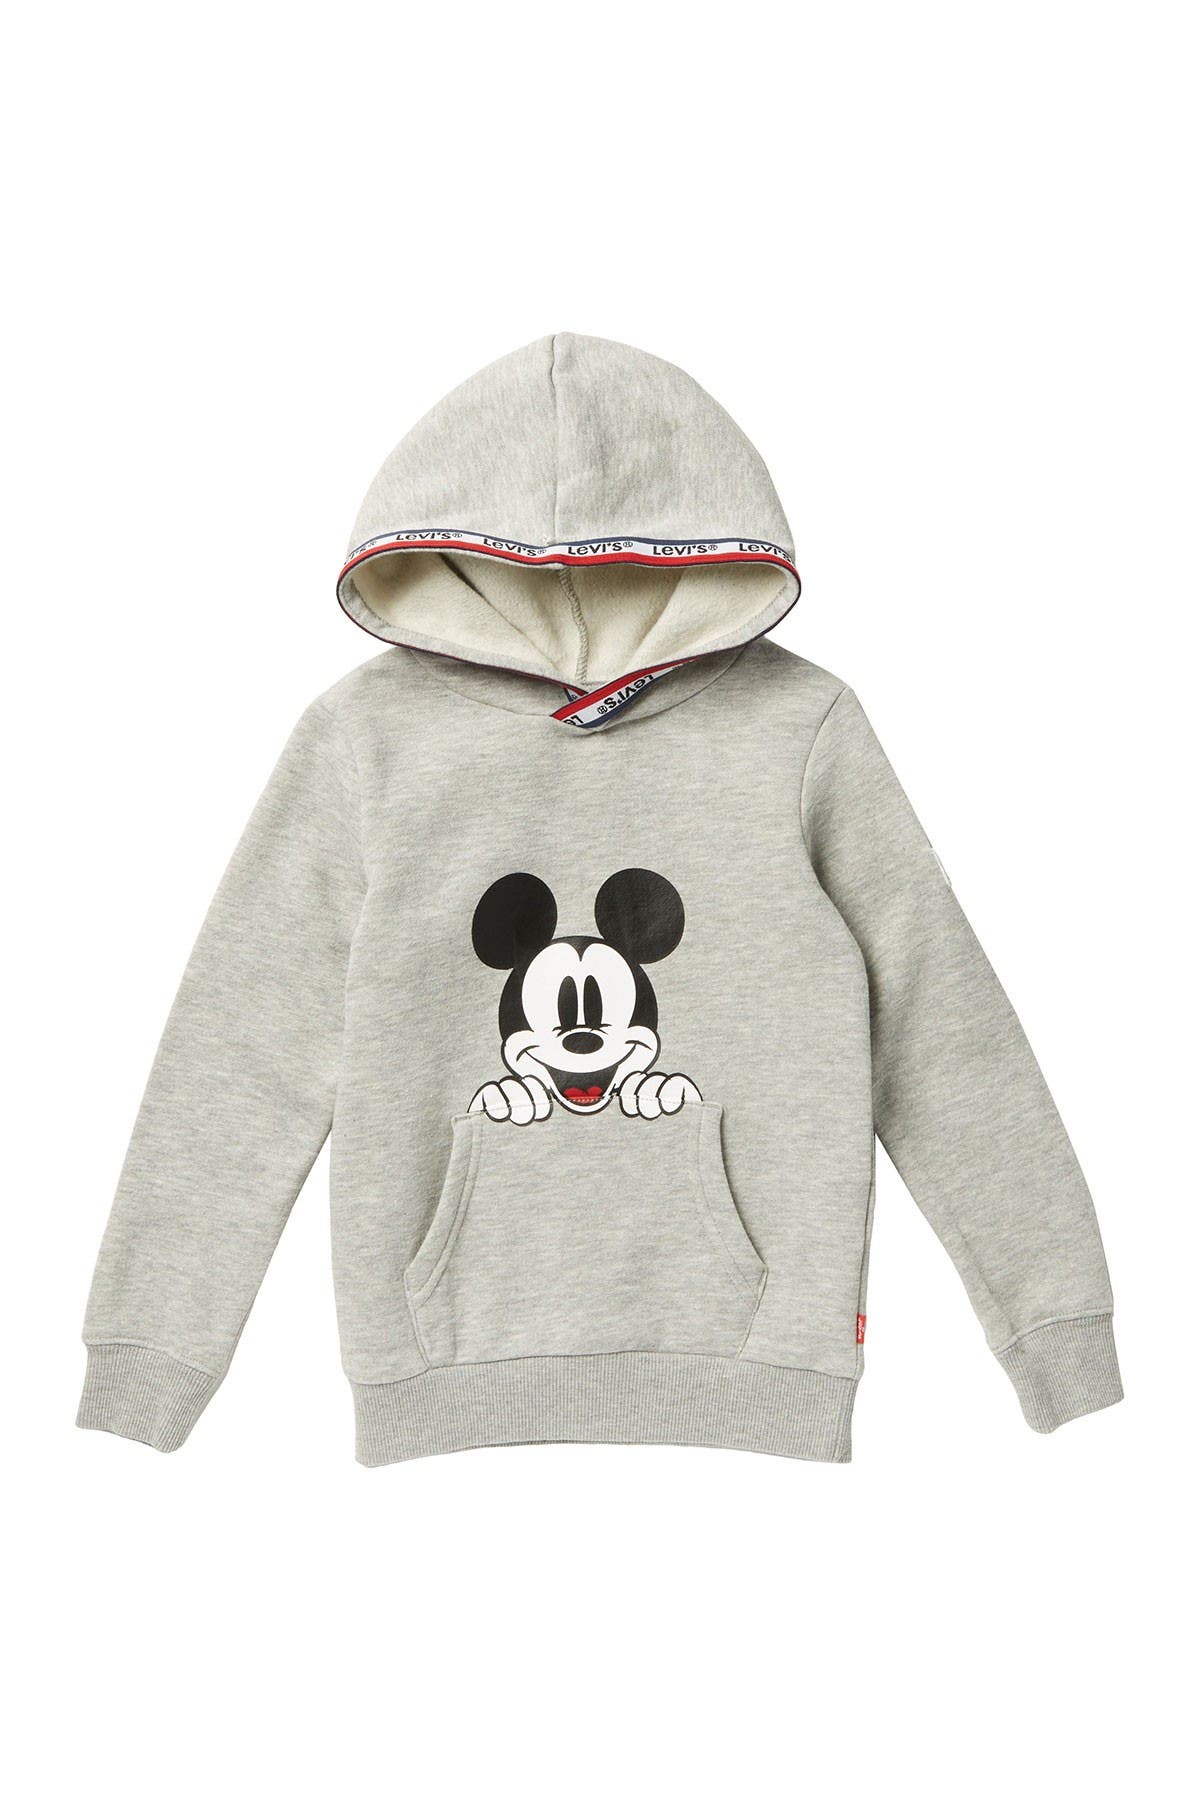 levi's mickey mouse hoodie